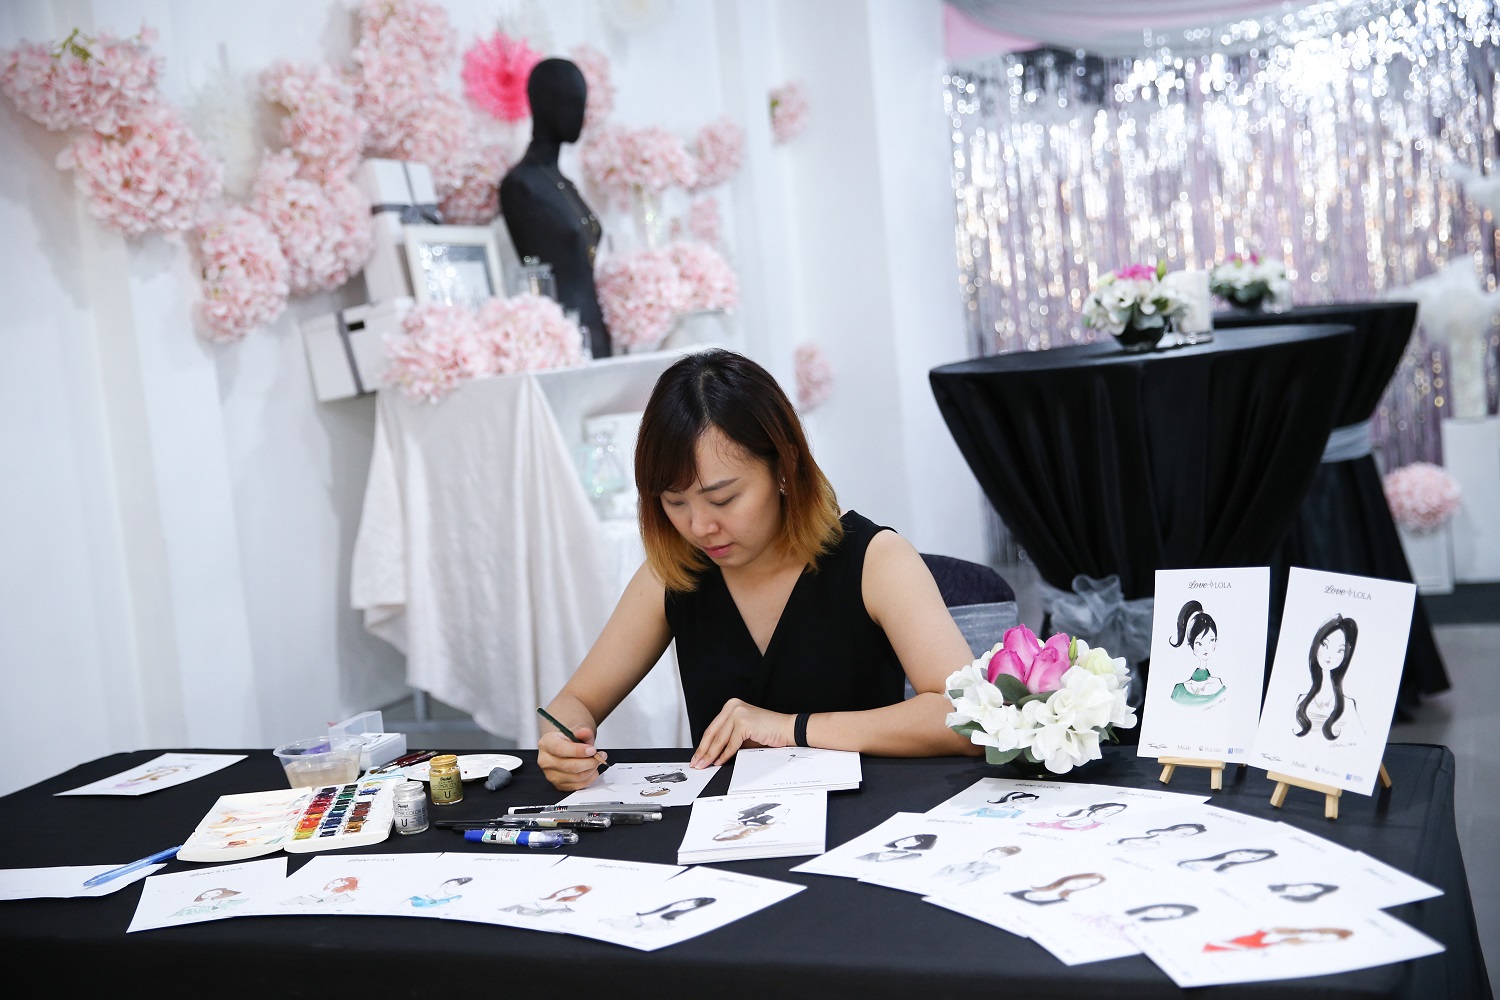 Love Lola launch,Illustrator Eleen Tan putting her finishing touches on her illustrations-Pamper.my